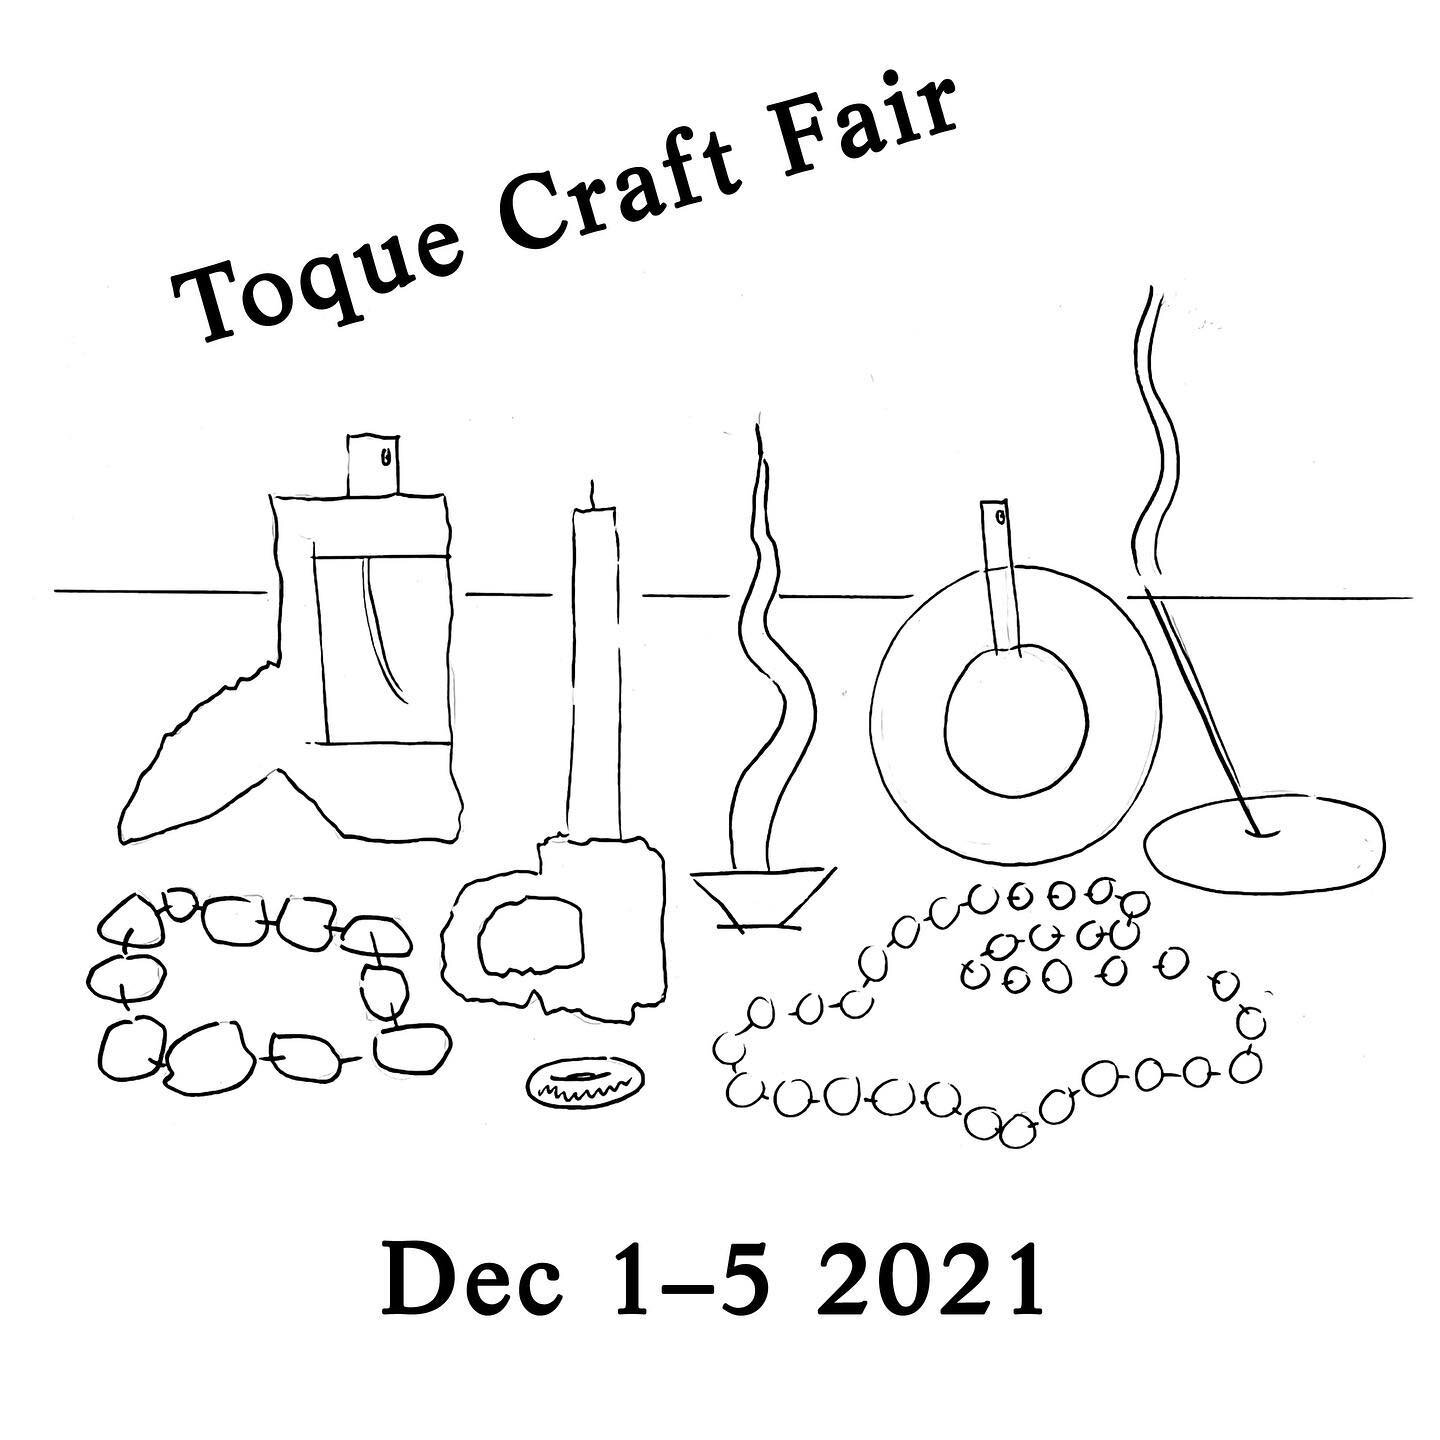 The virtual Toque Craft Fair goes live this Wednesday! Come support local makers and the @western_front. 

Dec 1-5, 2021, more info @toquecraftfair.